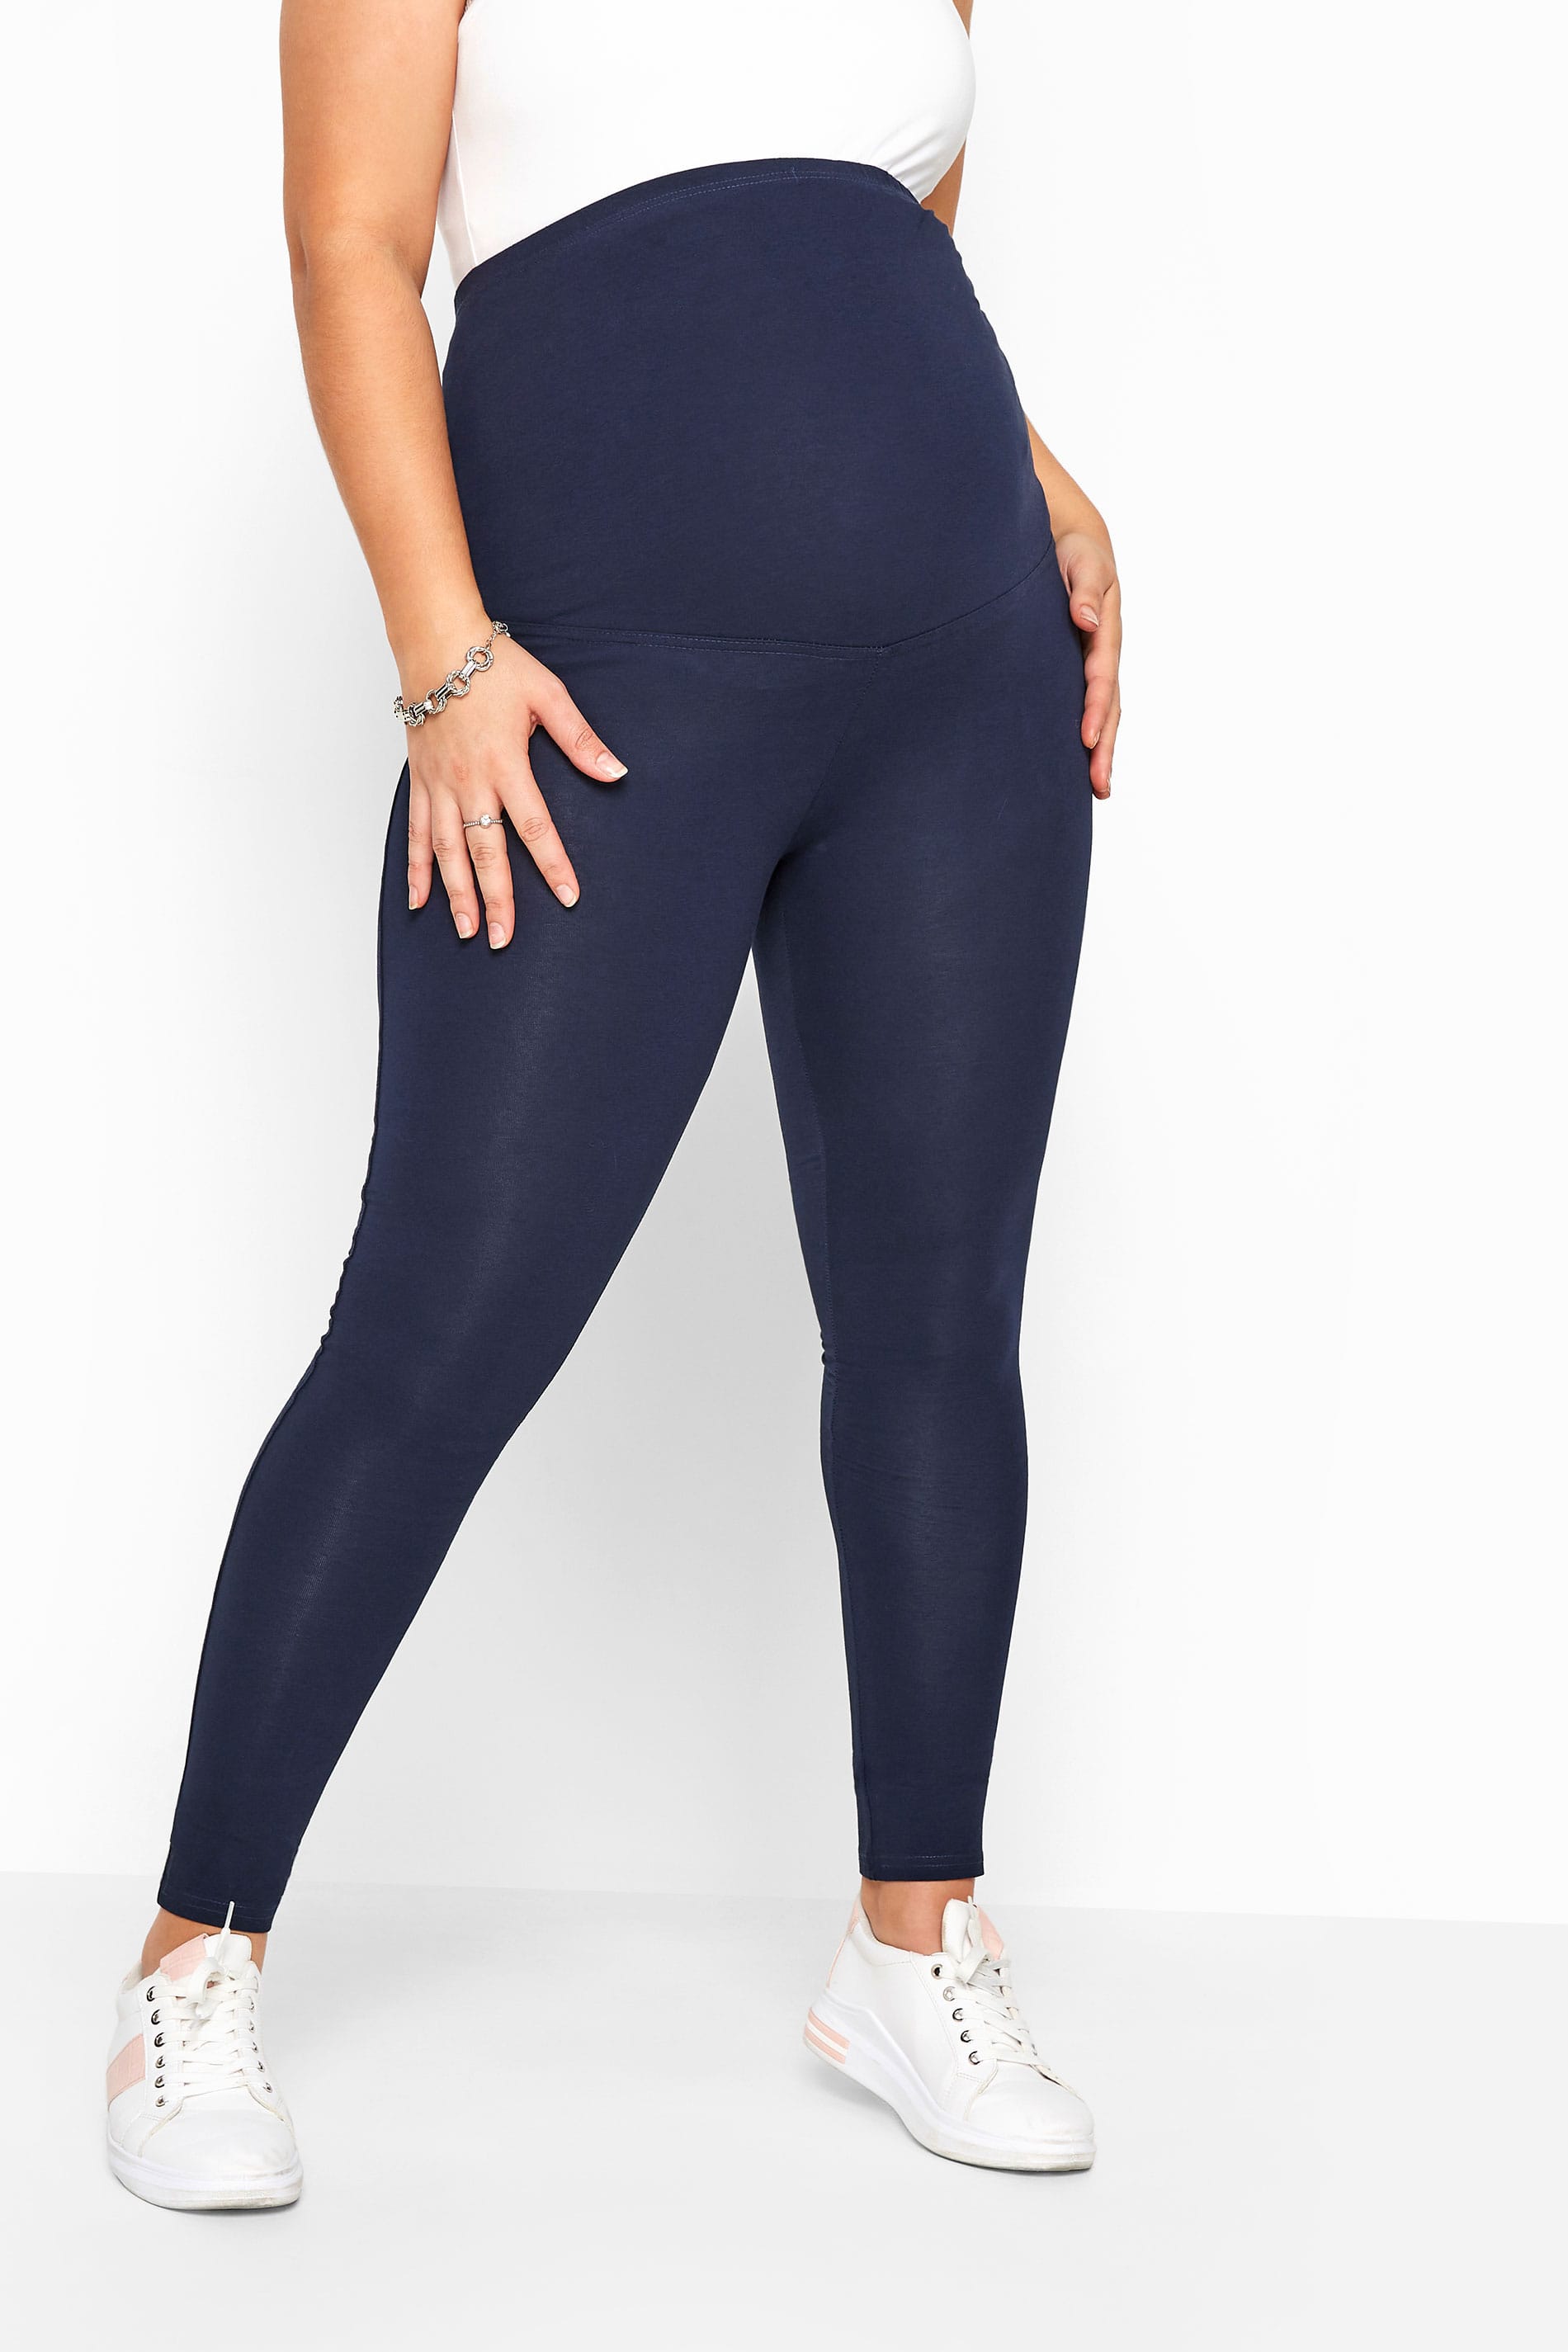 BUMP IT UP MATERNITY Curve Navy Blue Cotton Essential Leggings With Comfort Panel 1